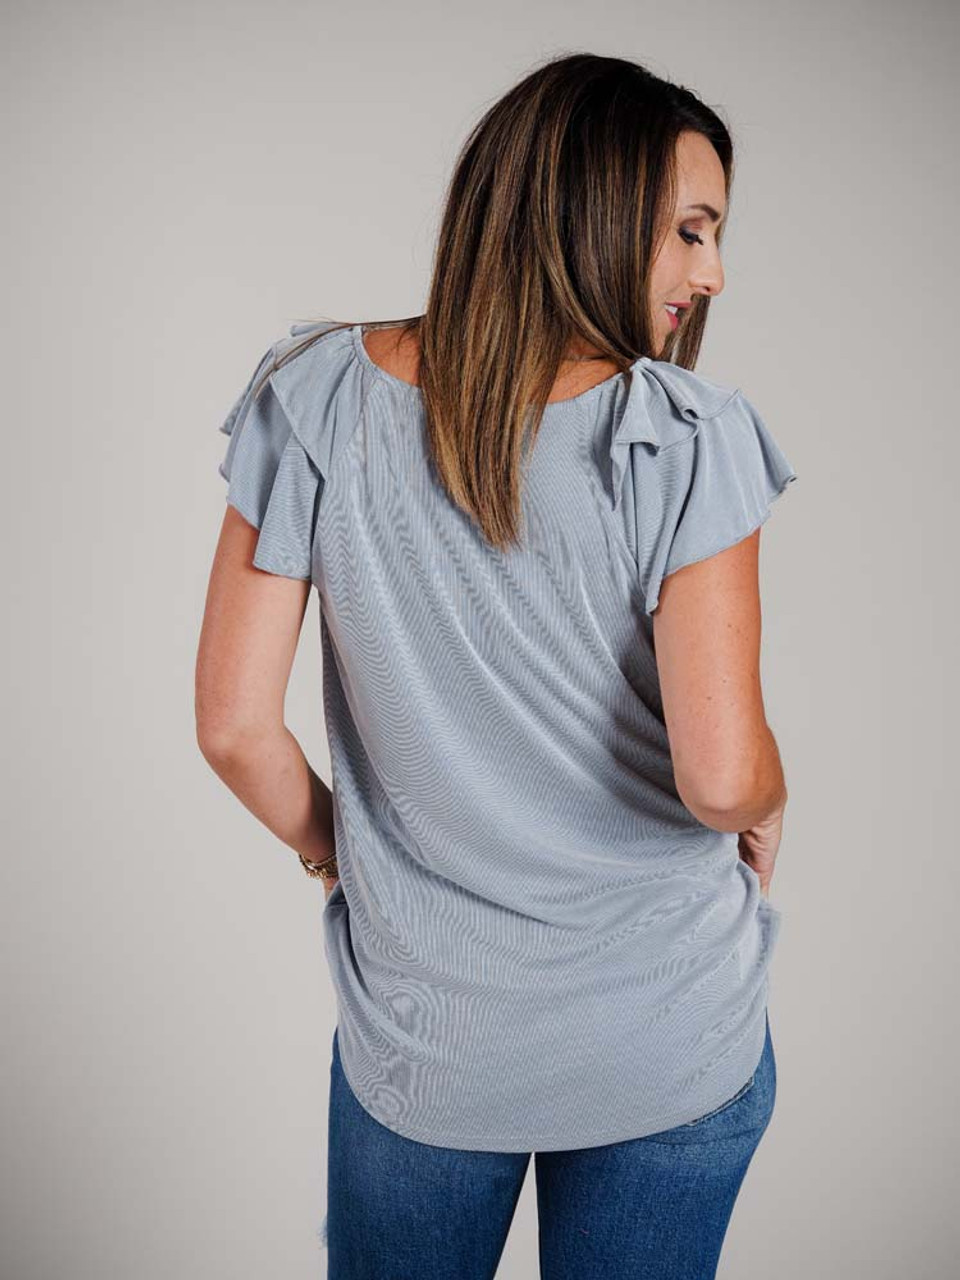 Greyish/white and denim blue micro stripe v-neck tunic top with double butterfly short sleeves